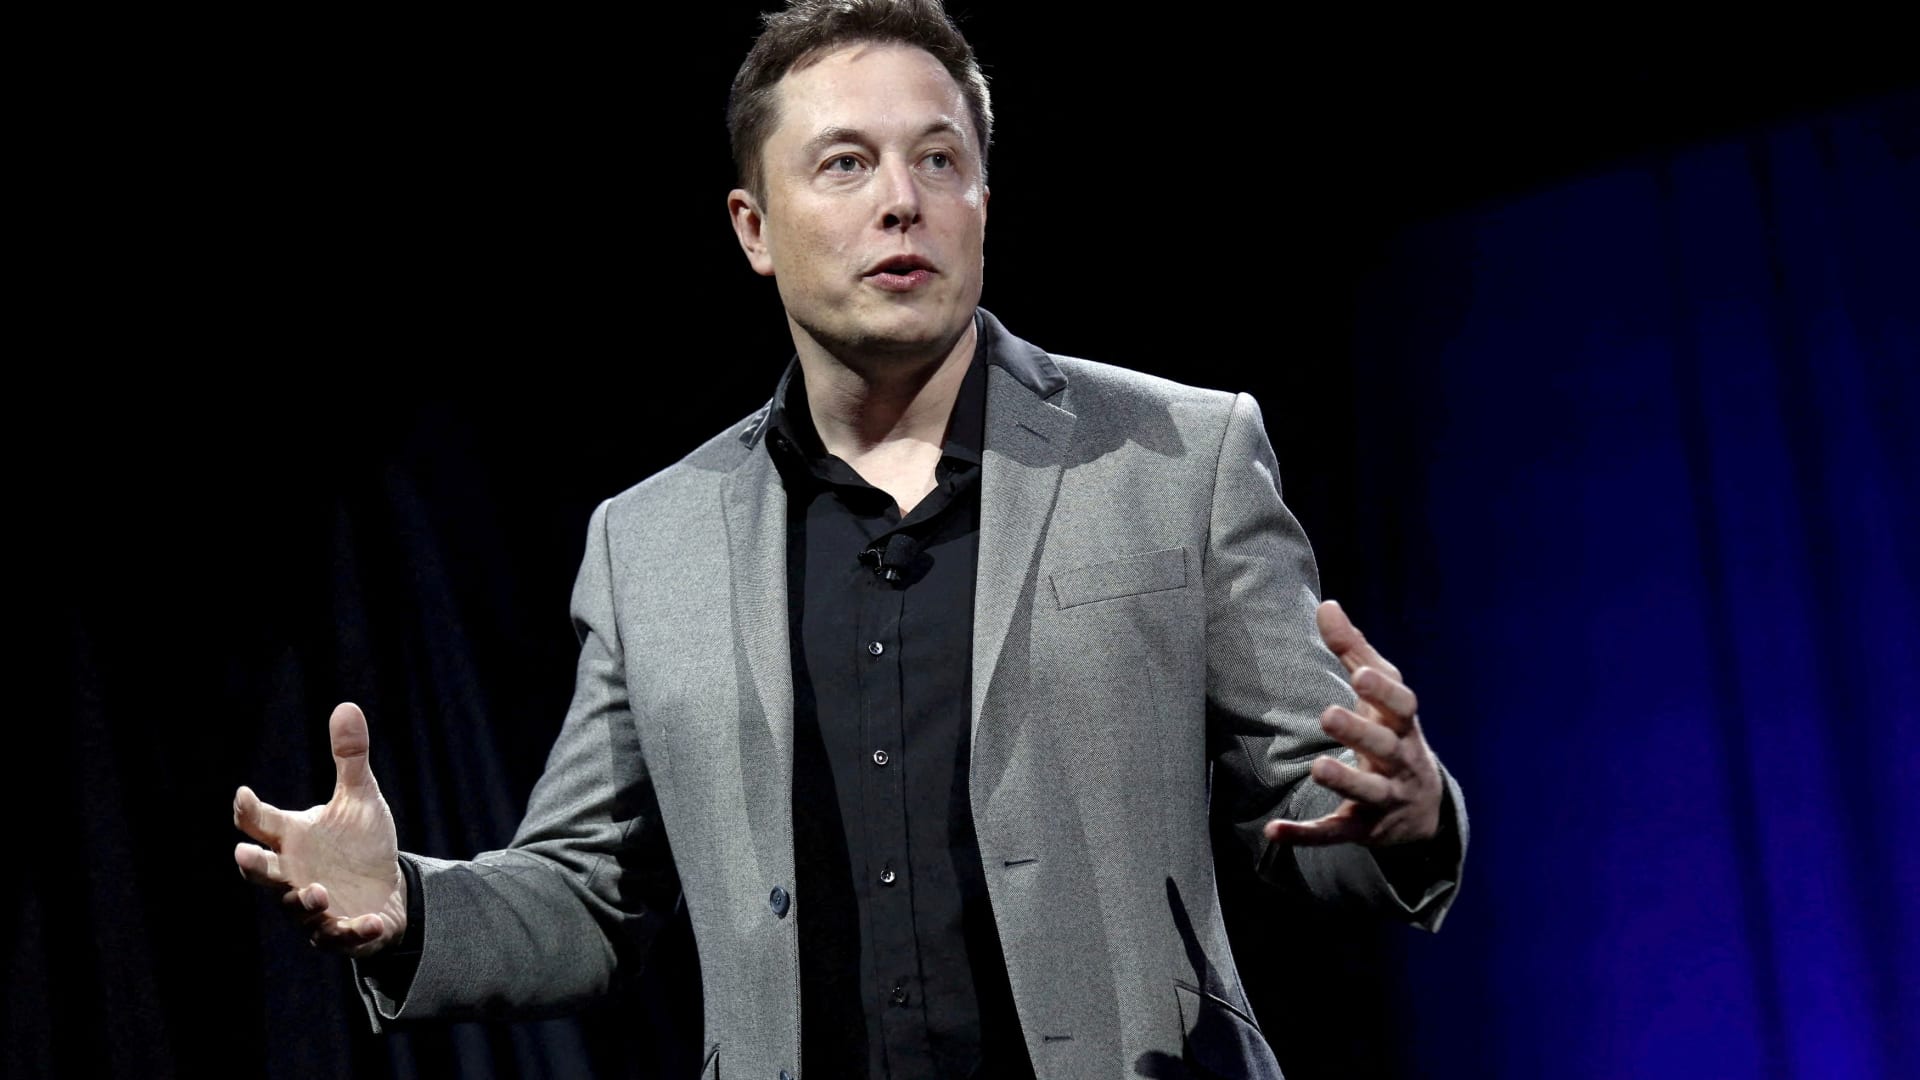 Elon Musk challenges Twitter CEO Parag Agrawal to a debate about robots